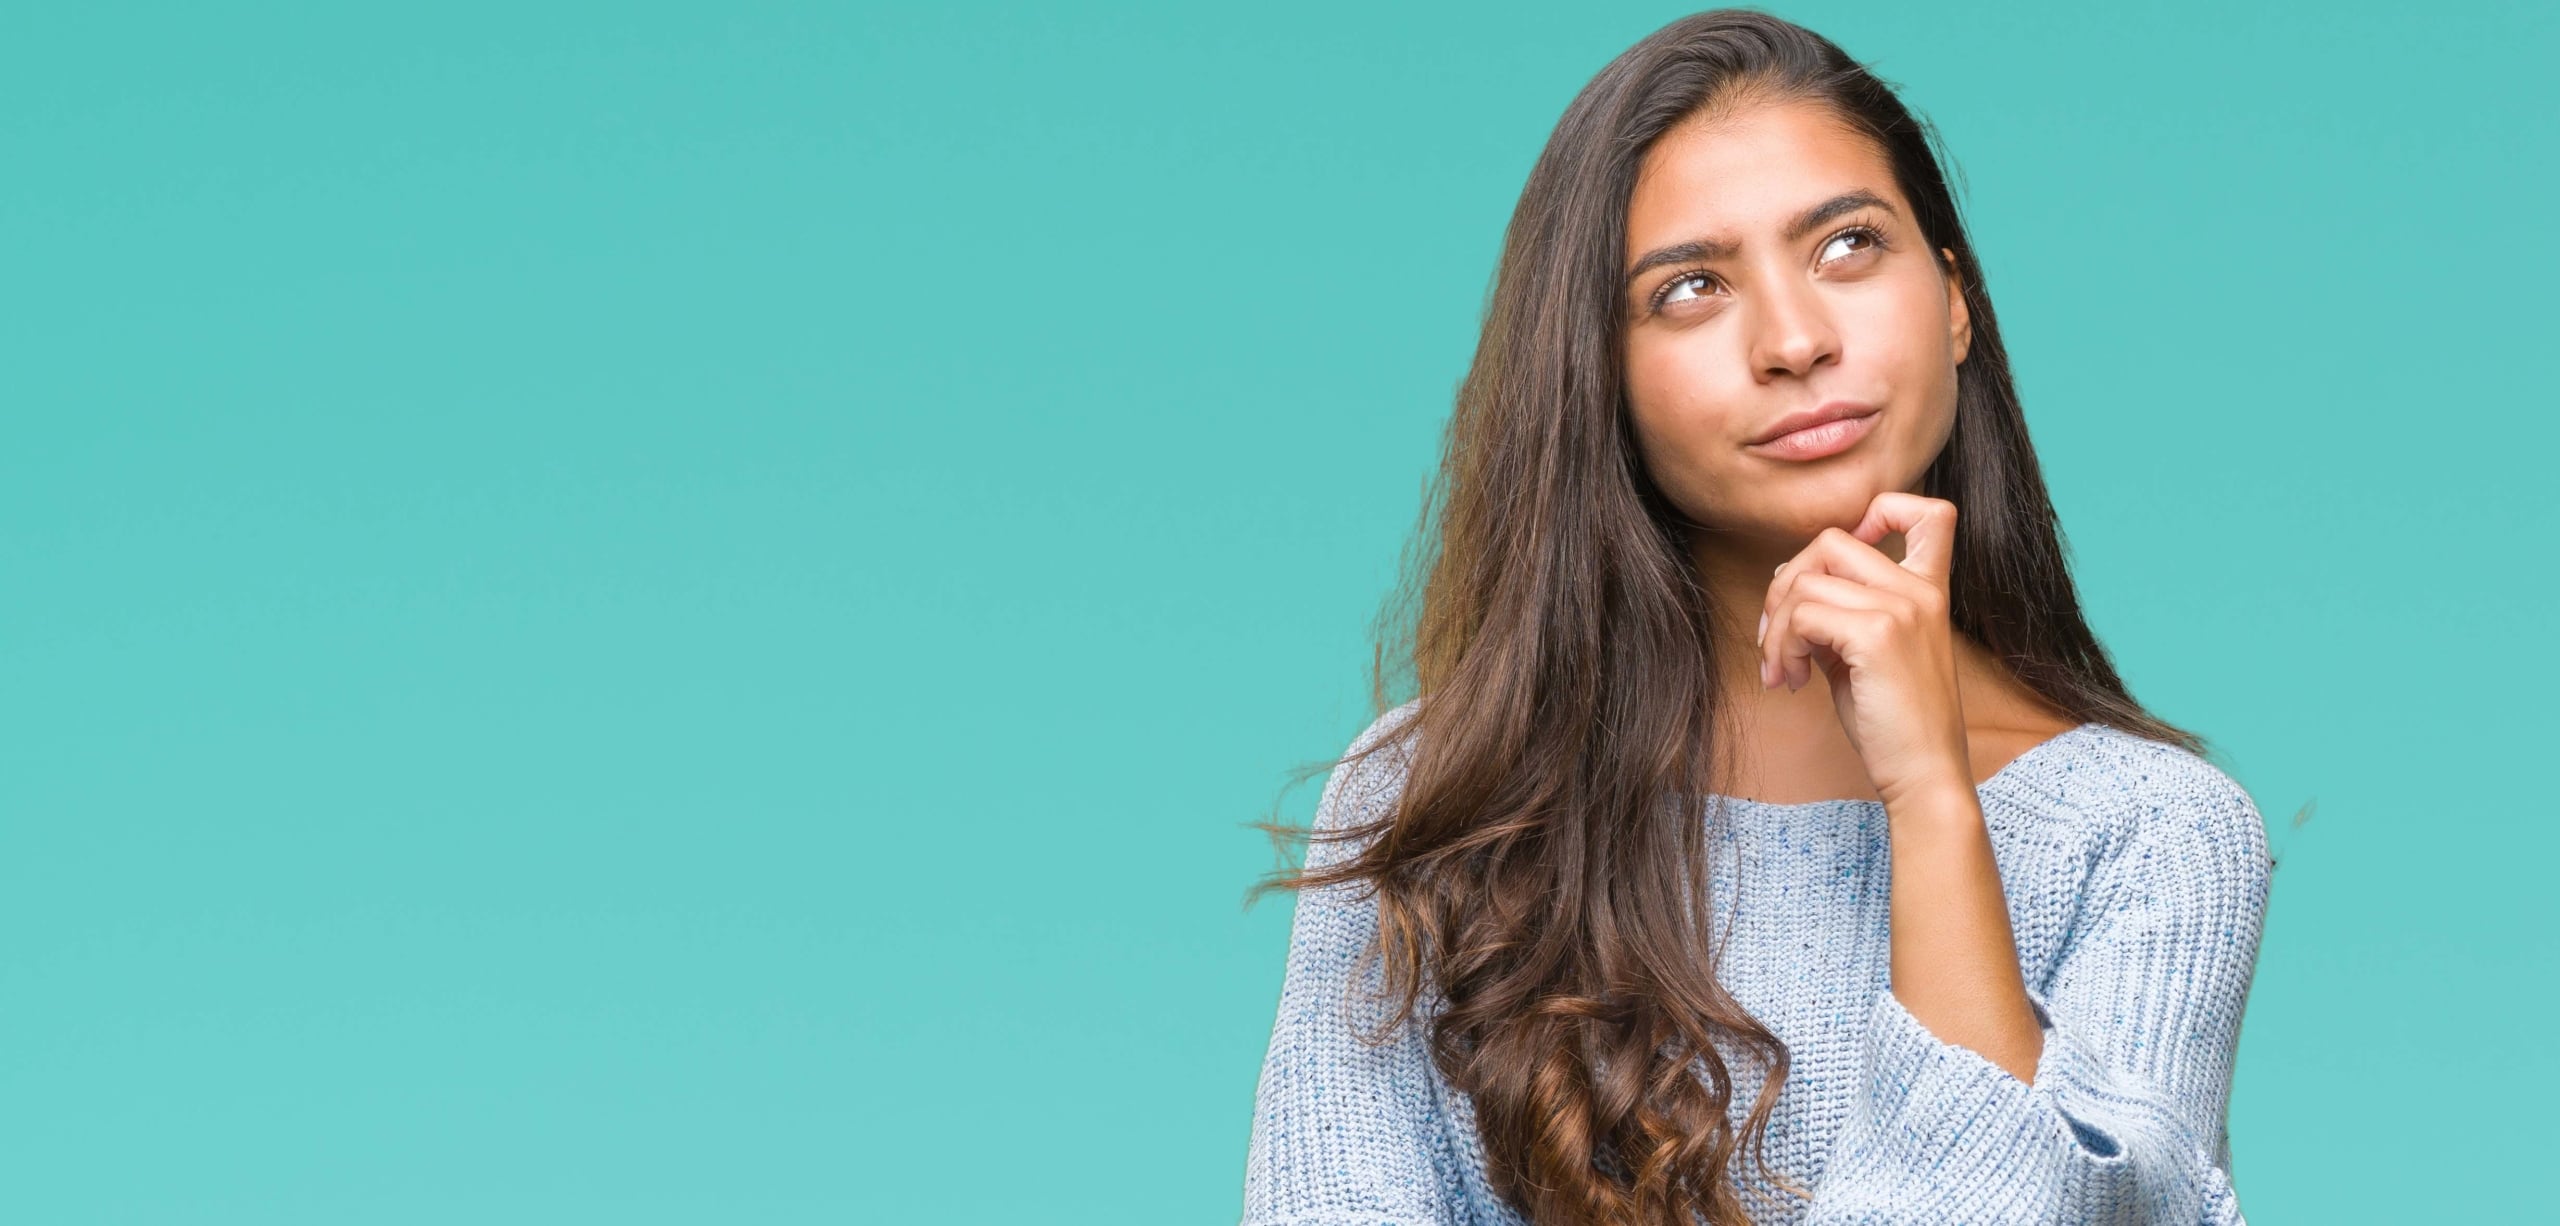 Young South Asian Woman with brown hair and a light blue knit sweater looks pensively into the upper right corner with her hand on her chin | 8 Car Insurance Questions To Refinance